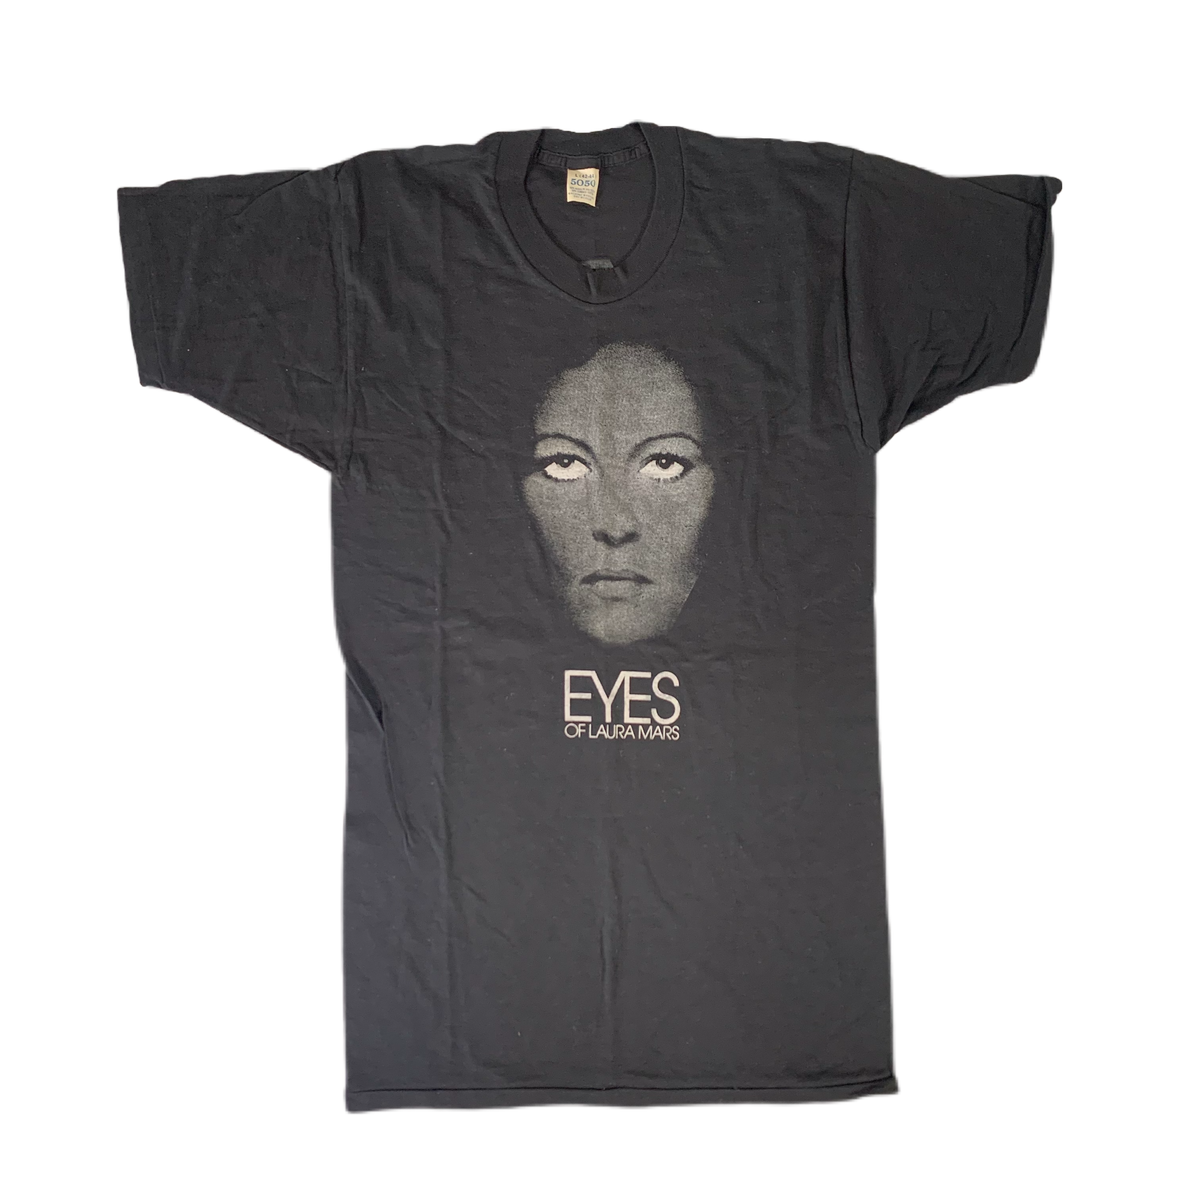 Vintage Eyes Of Laura Mars &quot;Colombia Pictures&quot; Promotional T-Shirt